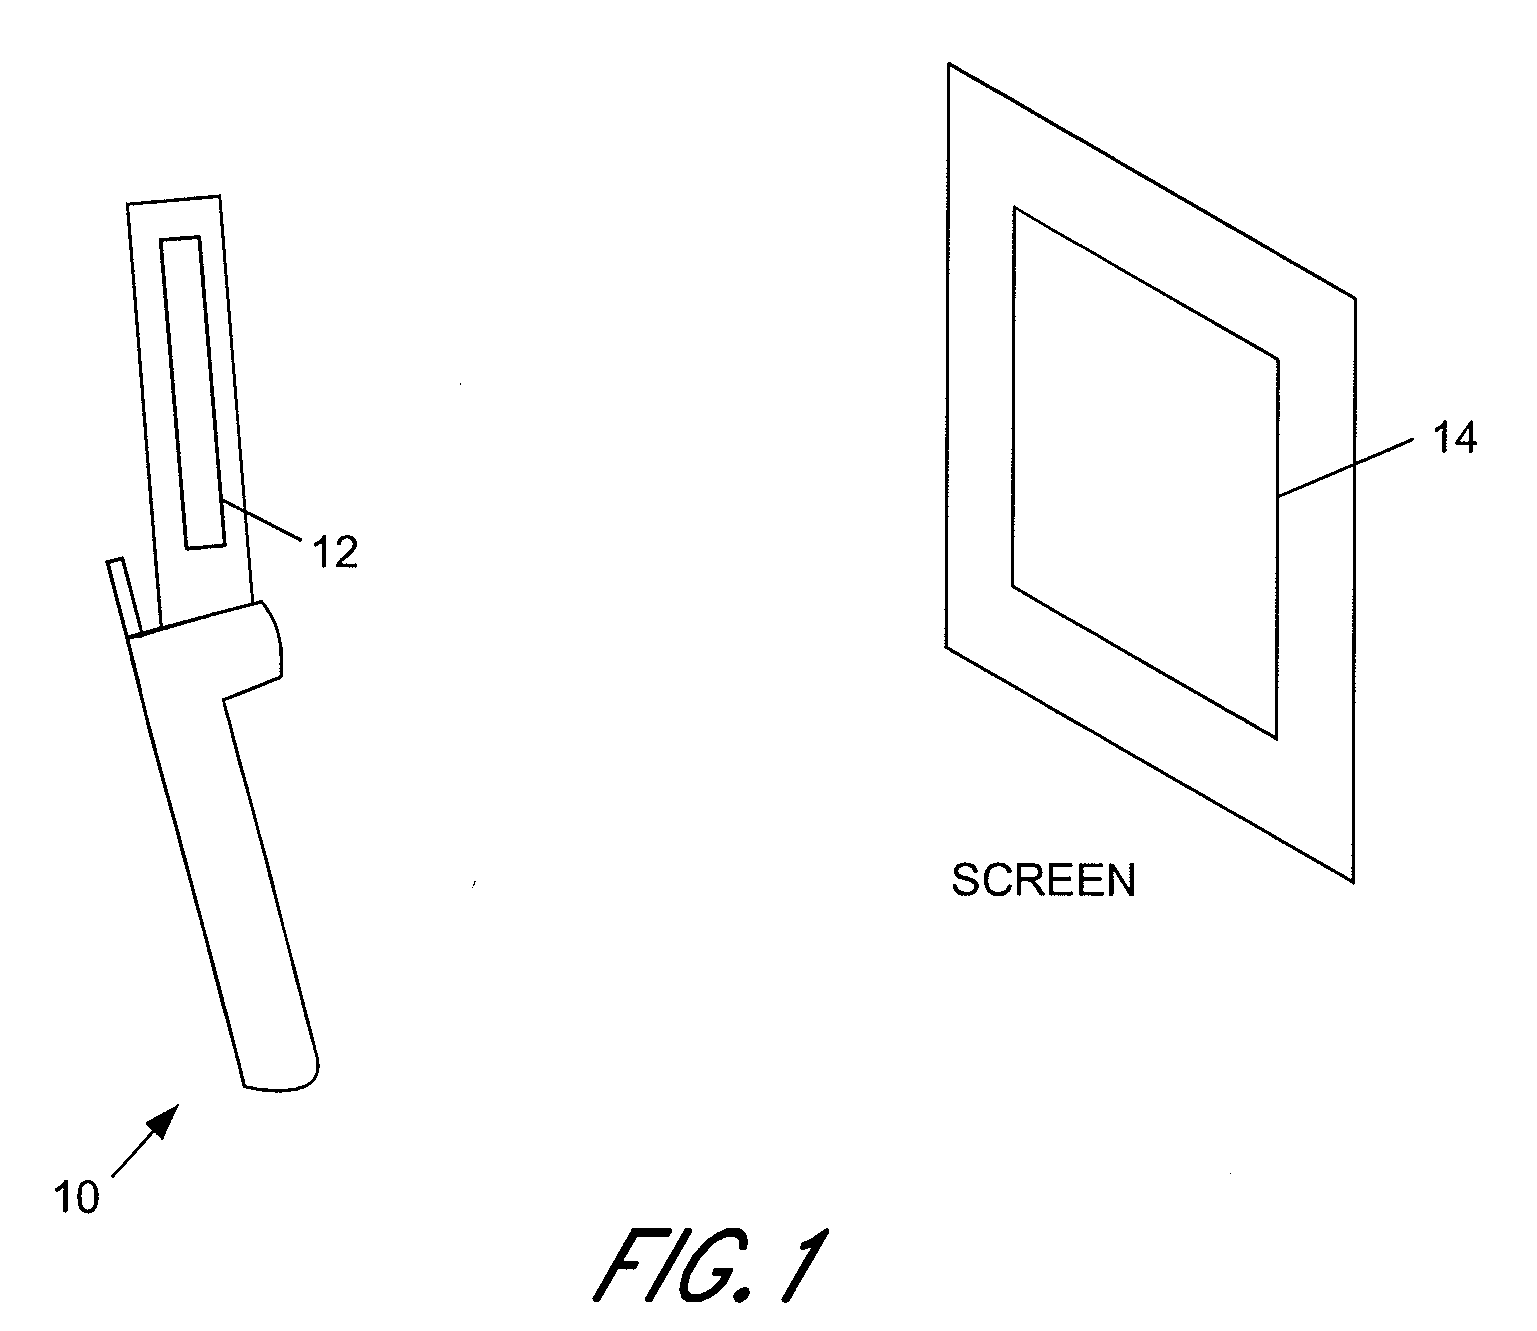 Holographic image display systems